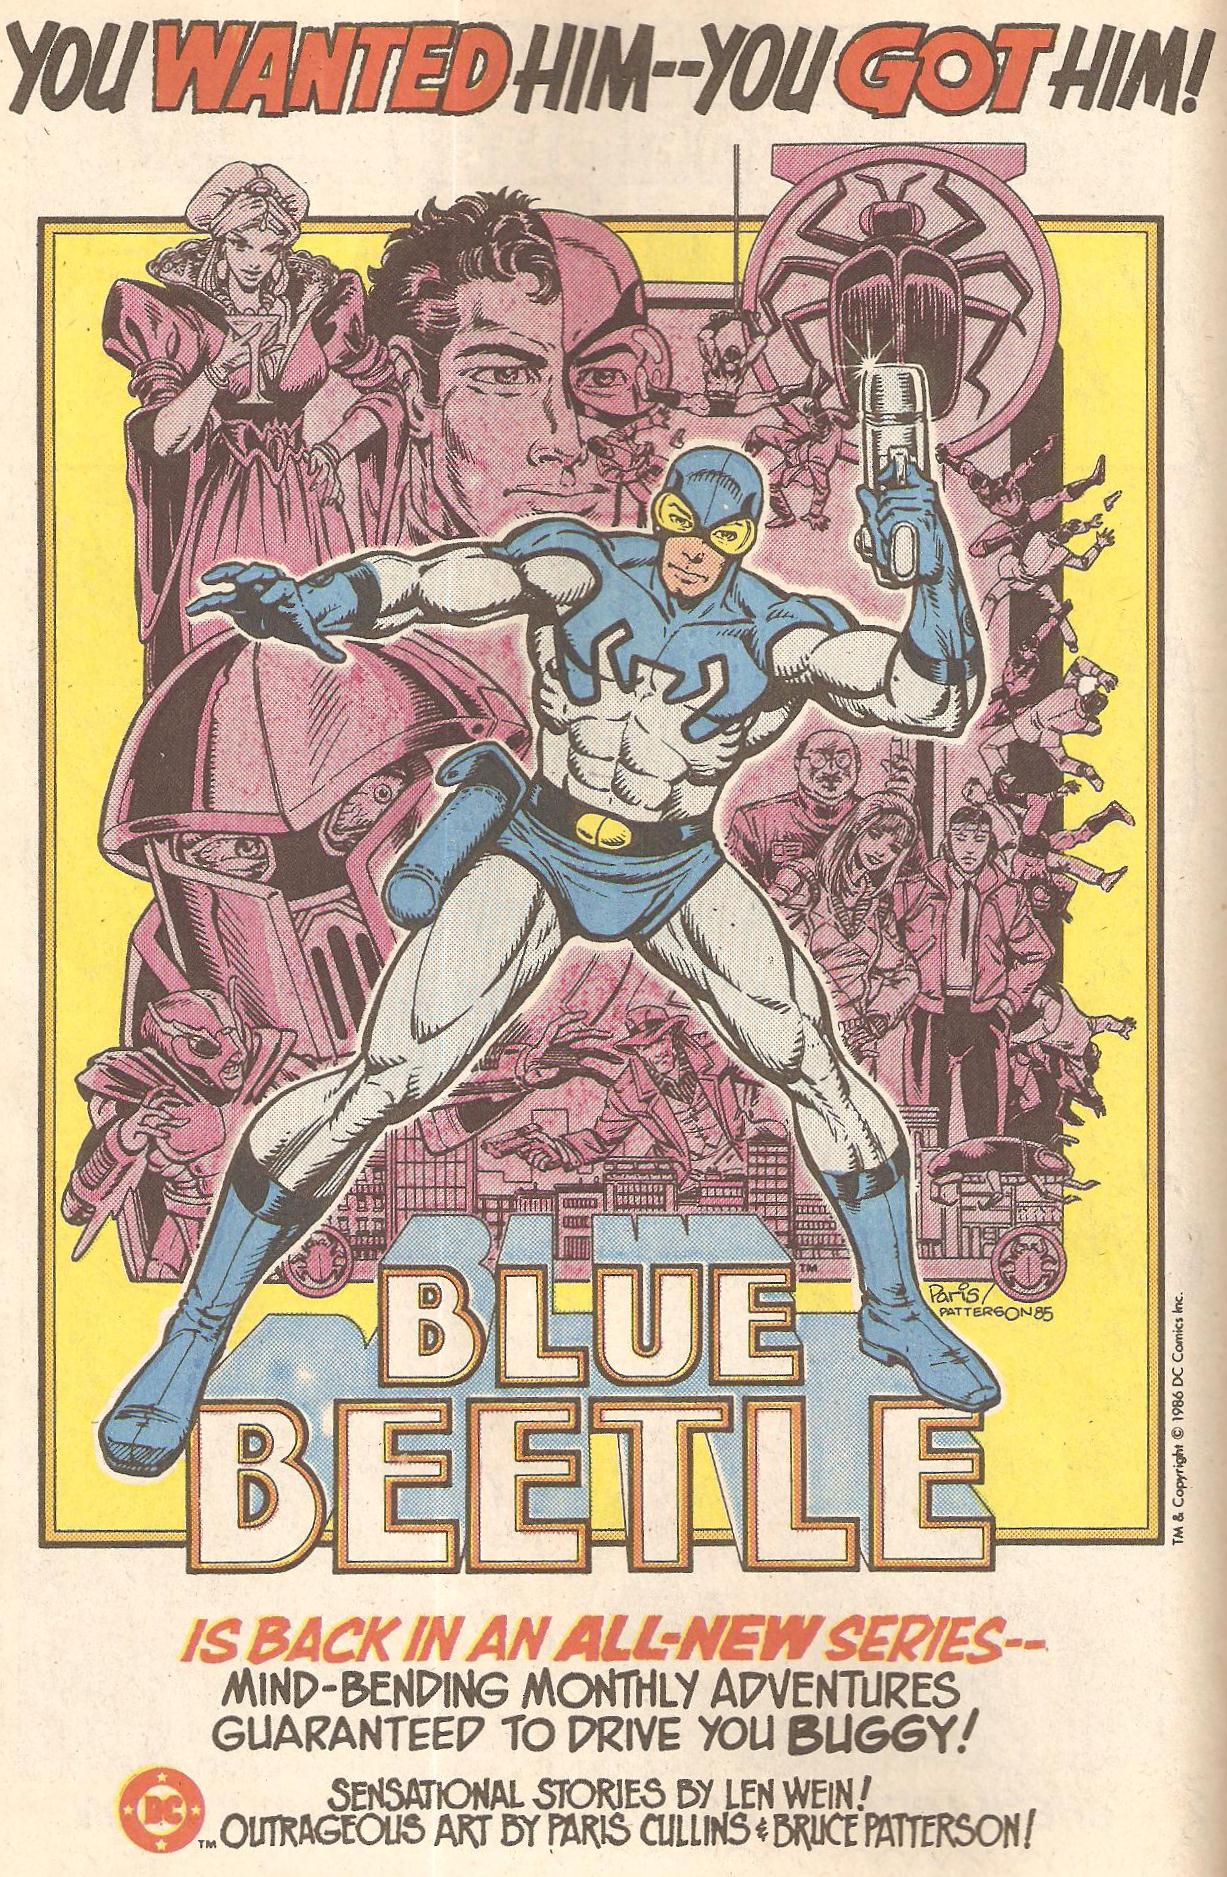 The Hollywood Handle on X: DC's 'BLUE BEETLE' is currently with